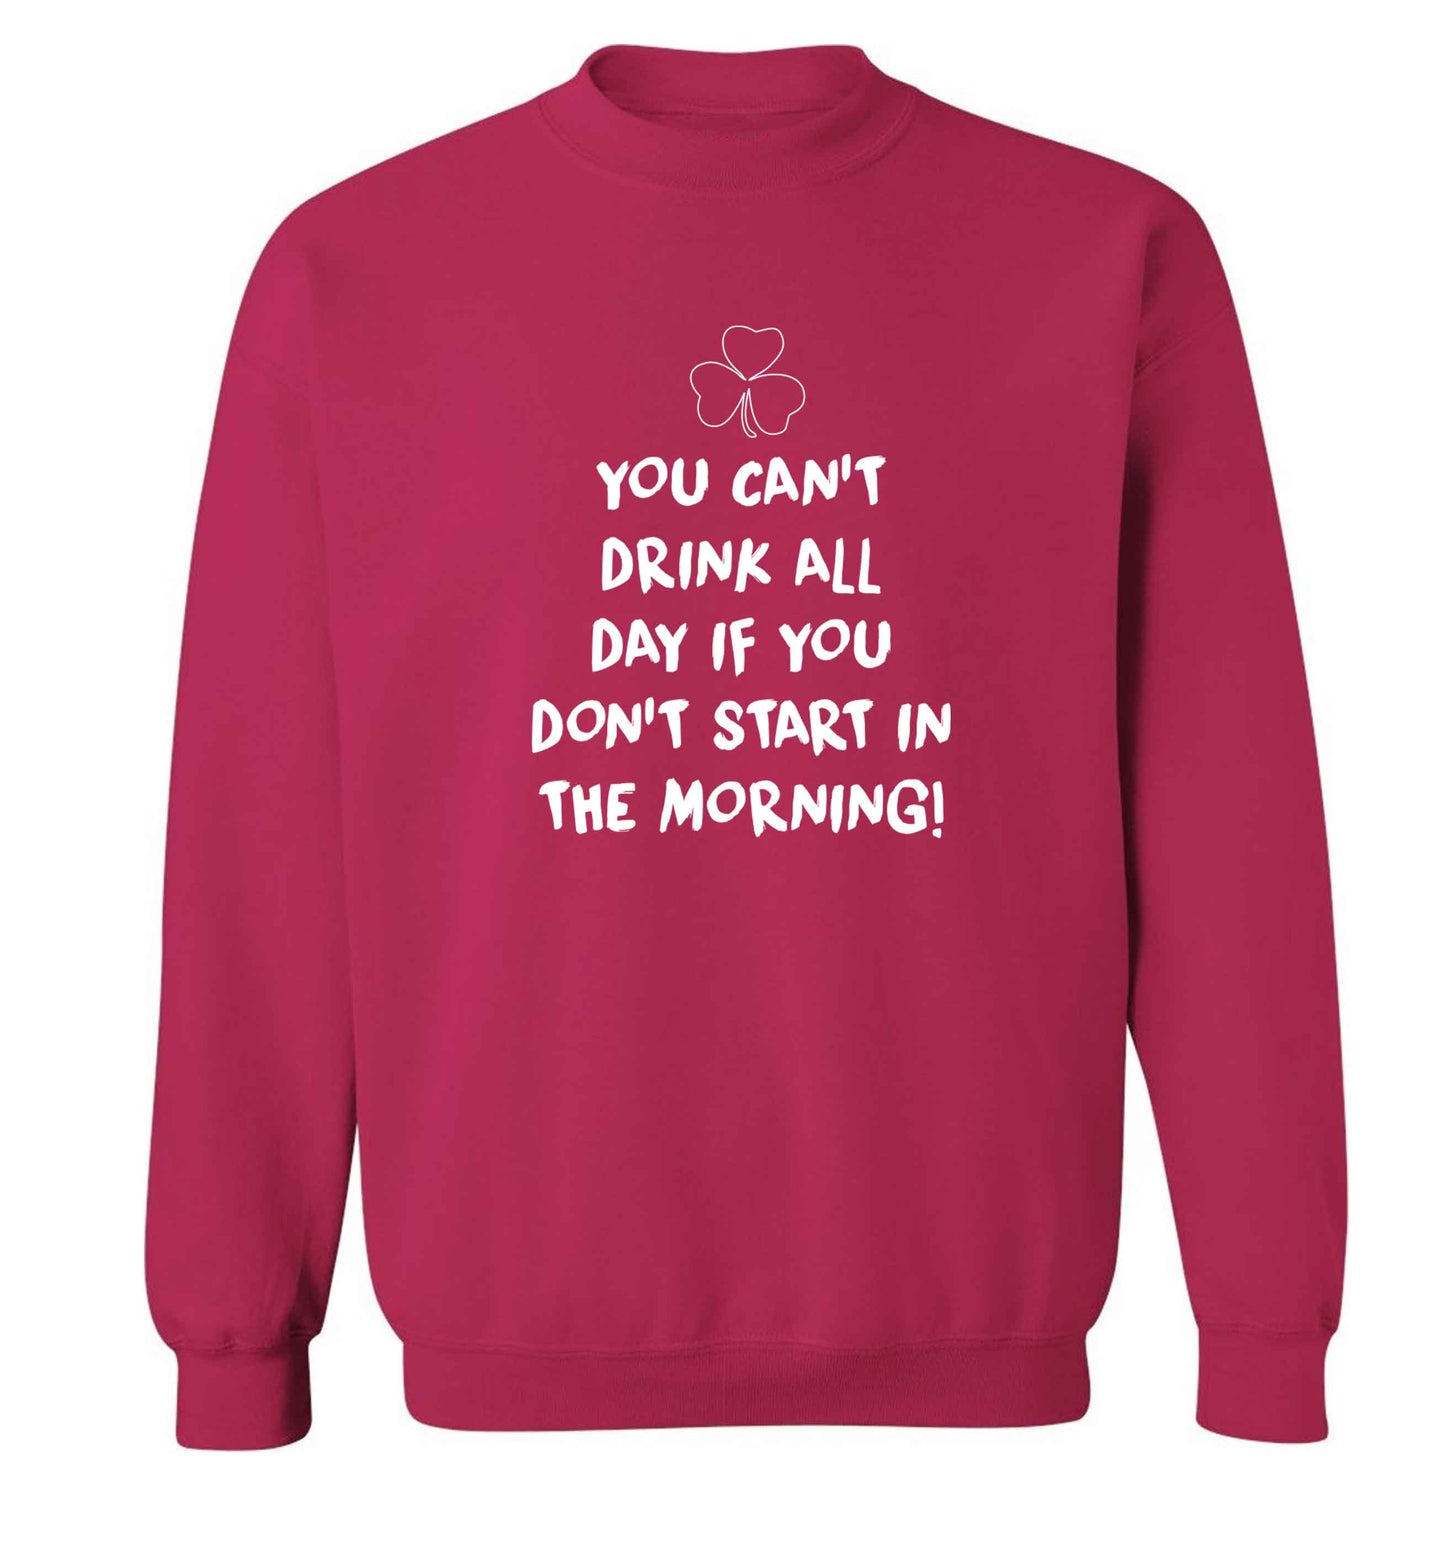 You can't drink all day if you don't start in the morning adult's unisex pink sweater 2XL